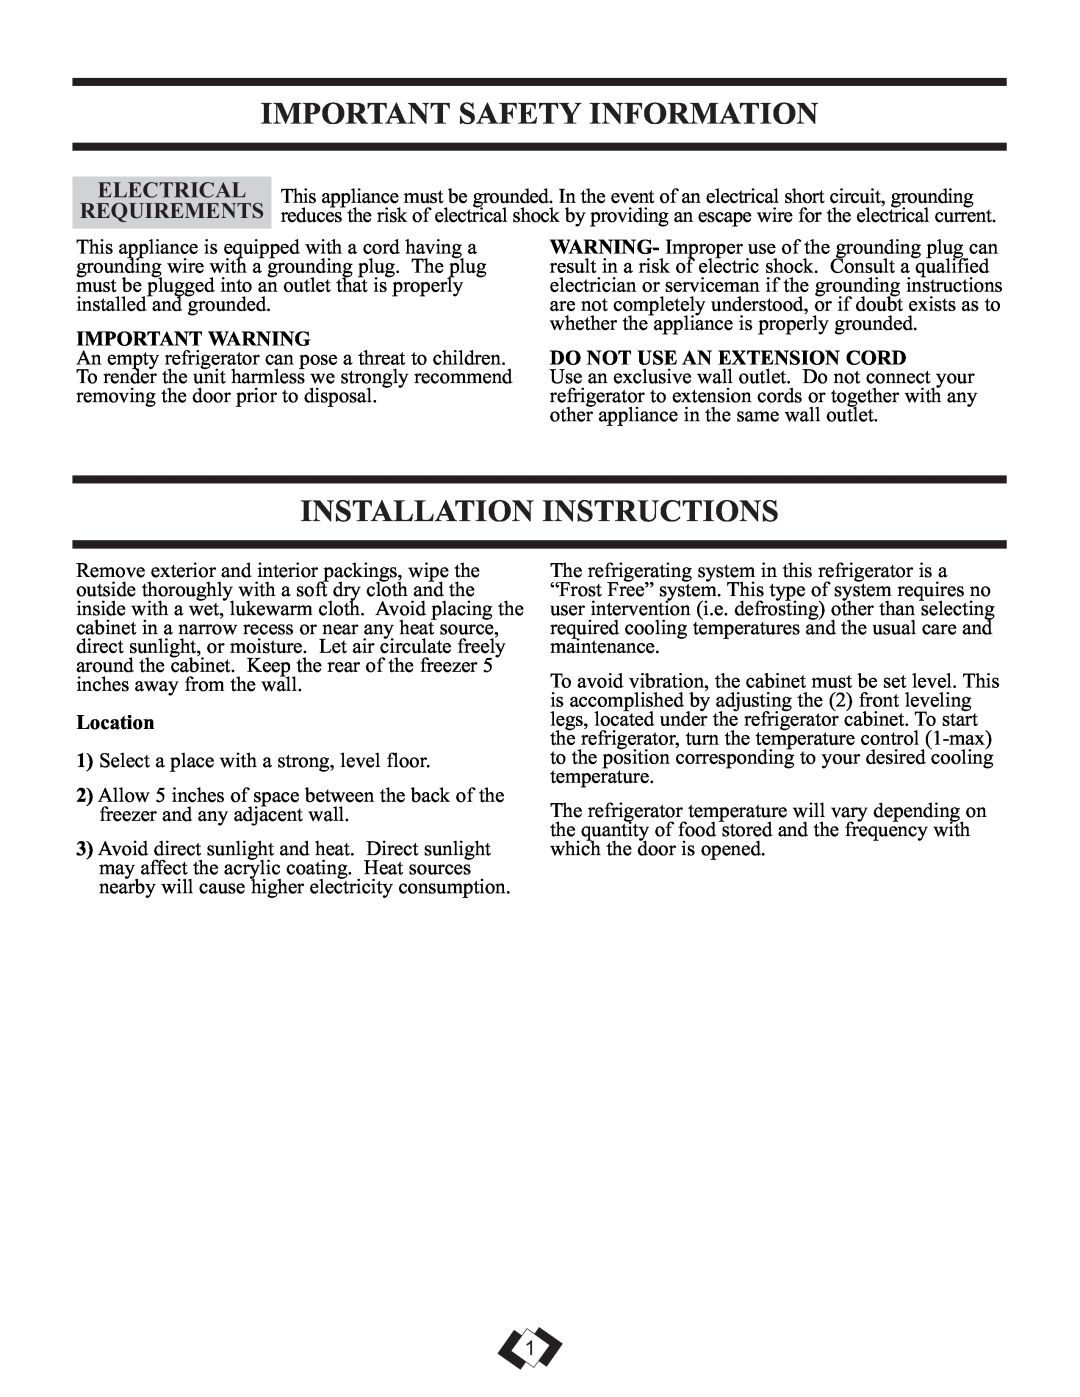 Sunbeam DFF258WSB Important Safety Information, Installation Instructions, Electrical, Requirements 